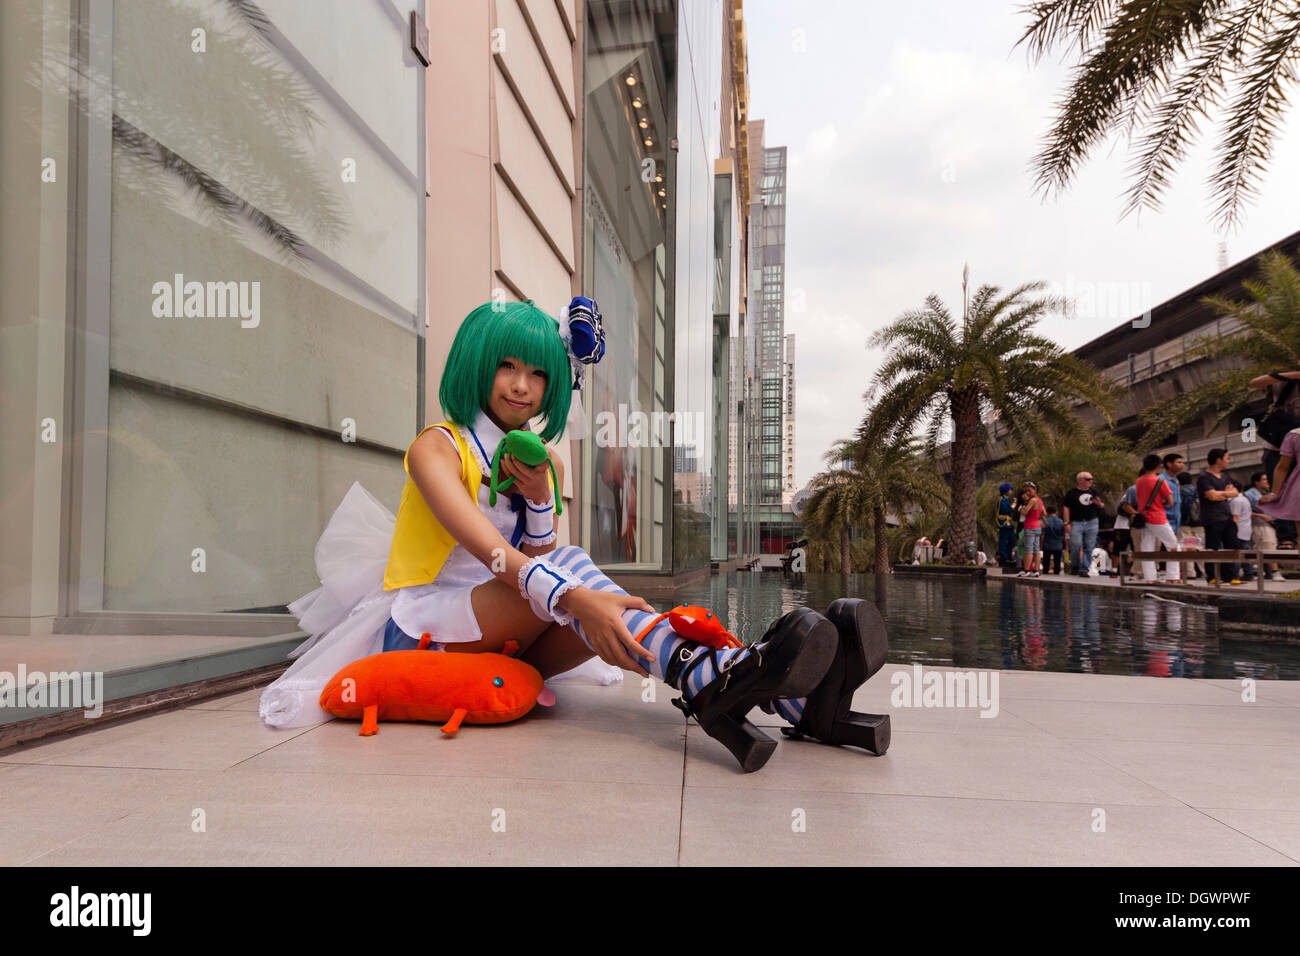 Cosplay, Harajuku, fan dressed as a Japanese manga character in front of the Siam Paragon shopping centre, Bangkok, Thailand Stock Photo